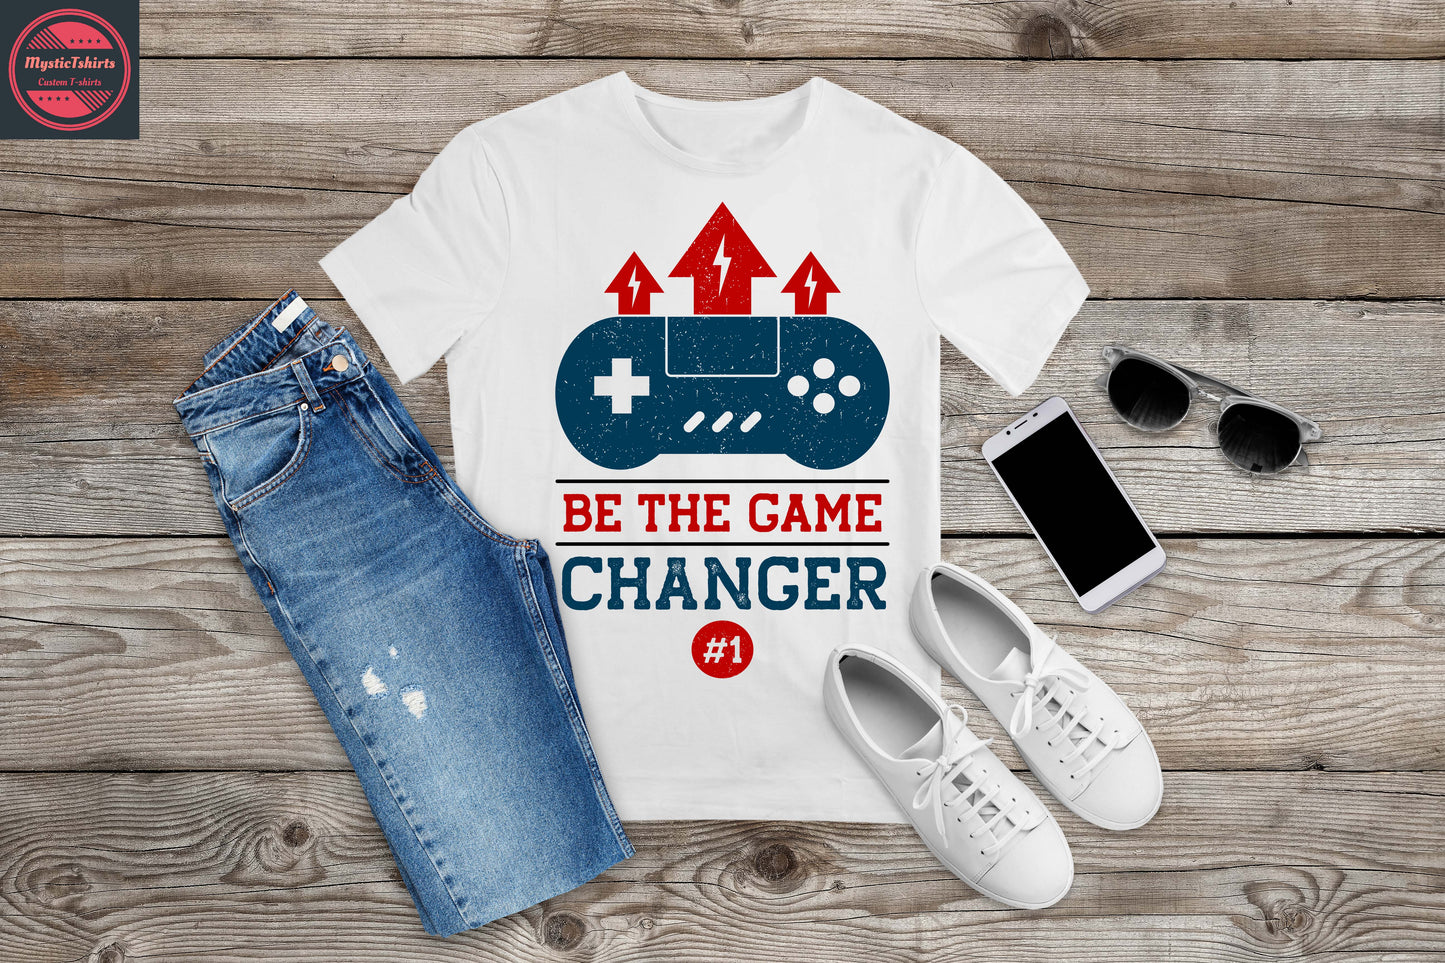 025. BE THE GAME CHANGER, Custom Made Shirt, Personalized T-Shirt, Custom Text, Make Your Own Shirt, Custom Tee